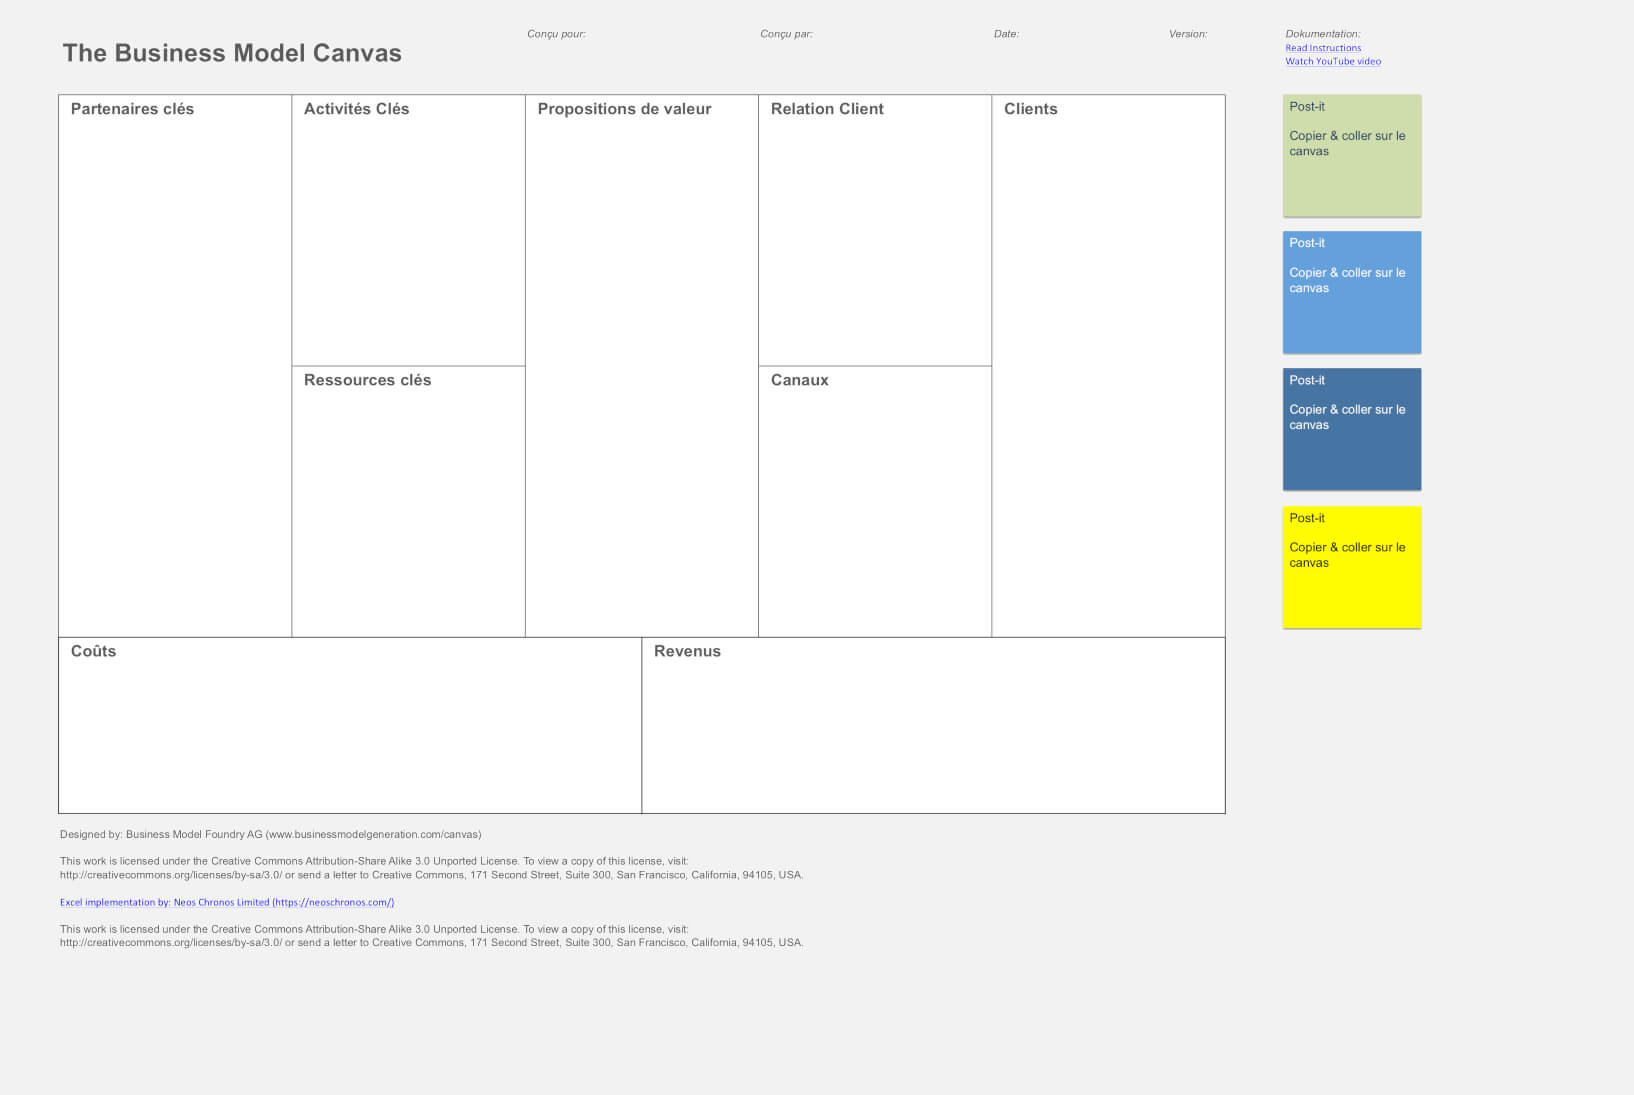 026 Business Model Canvas Neos Chronos French Template Ideas For Business Model Canvas Template Word